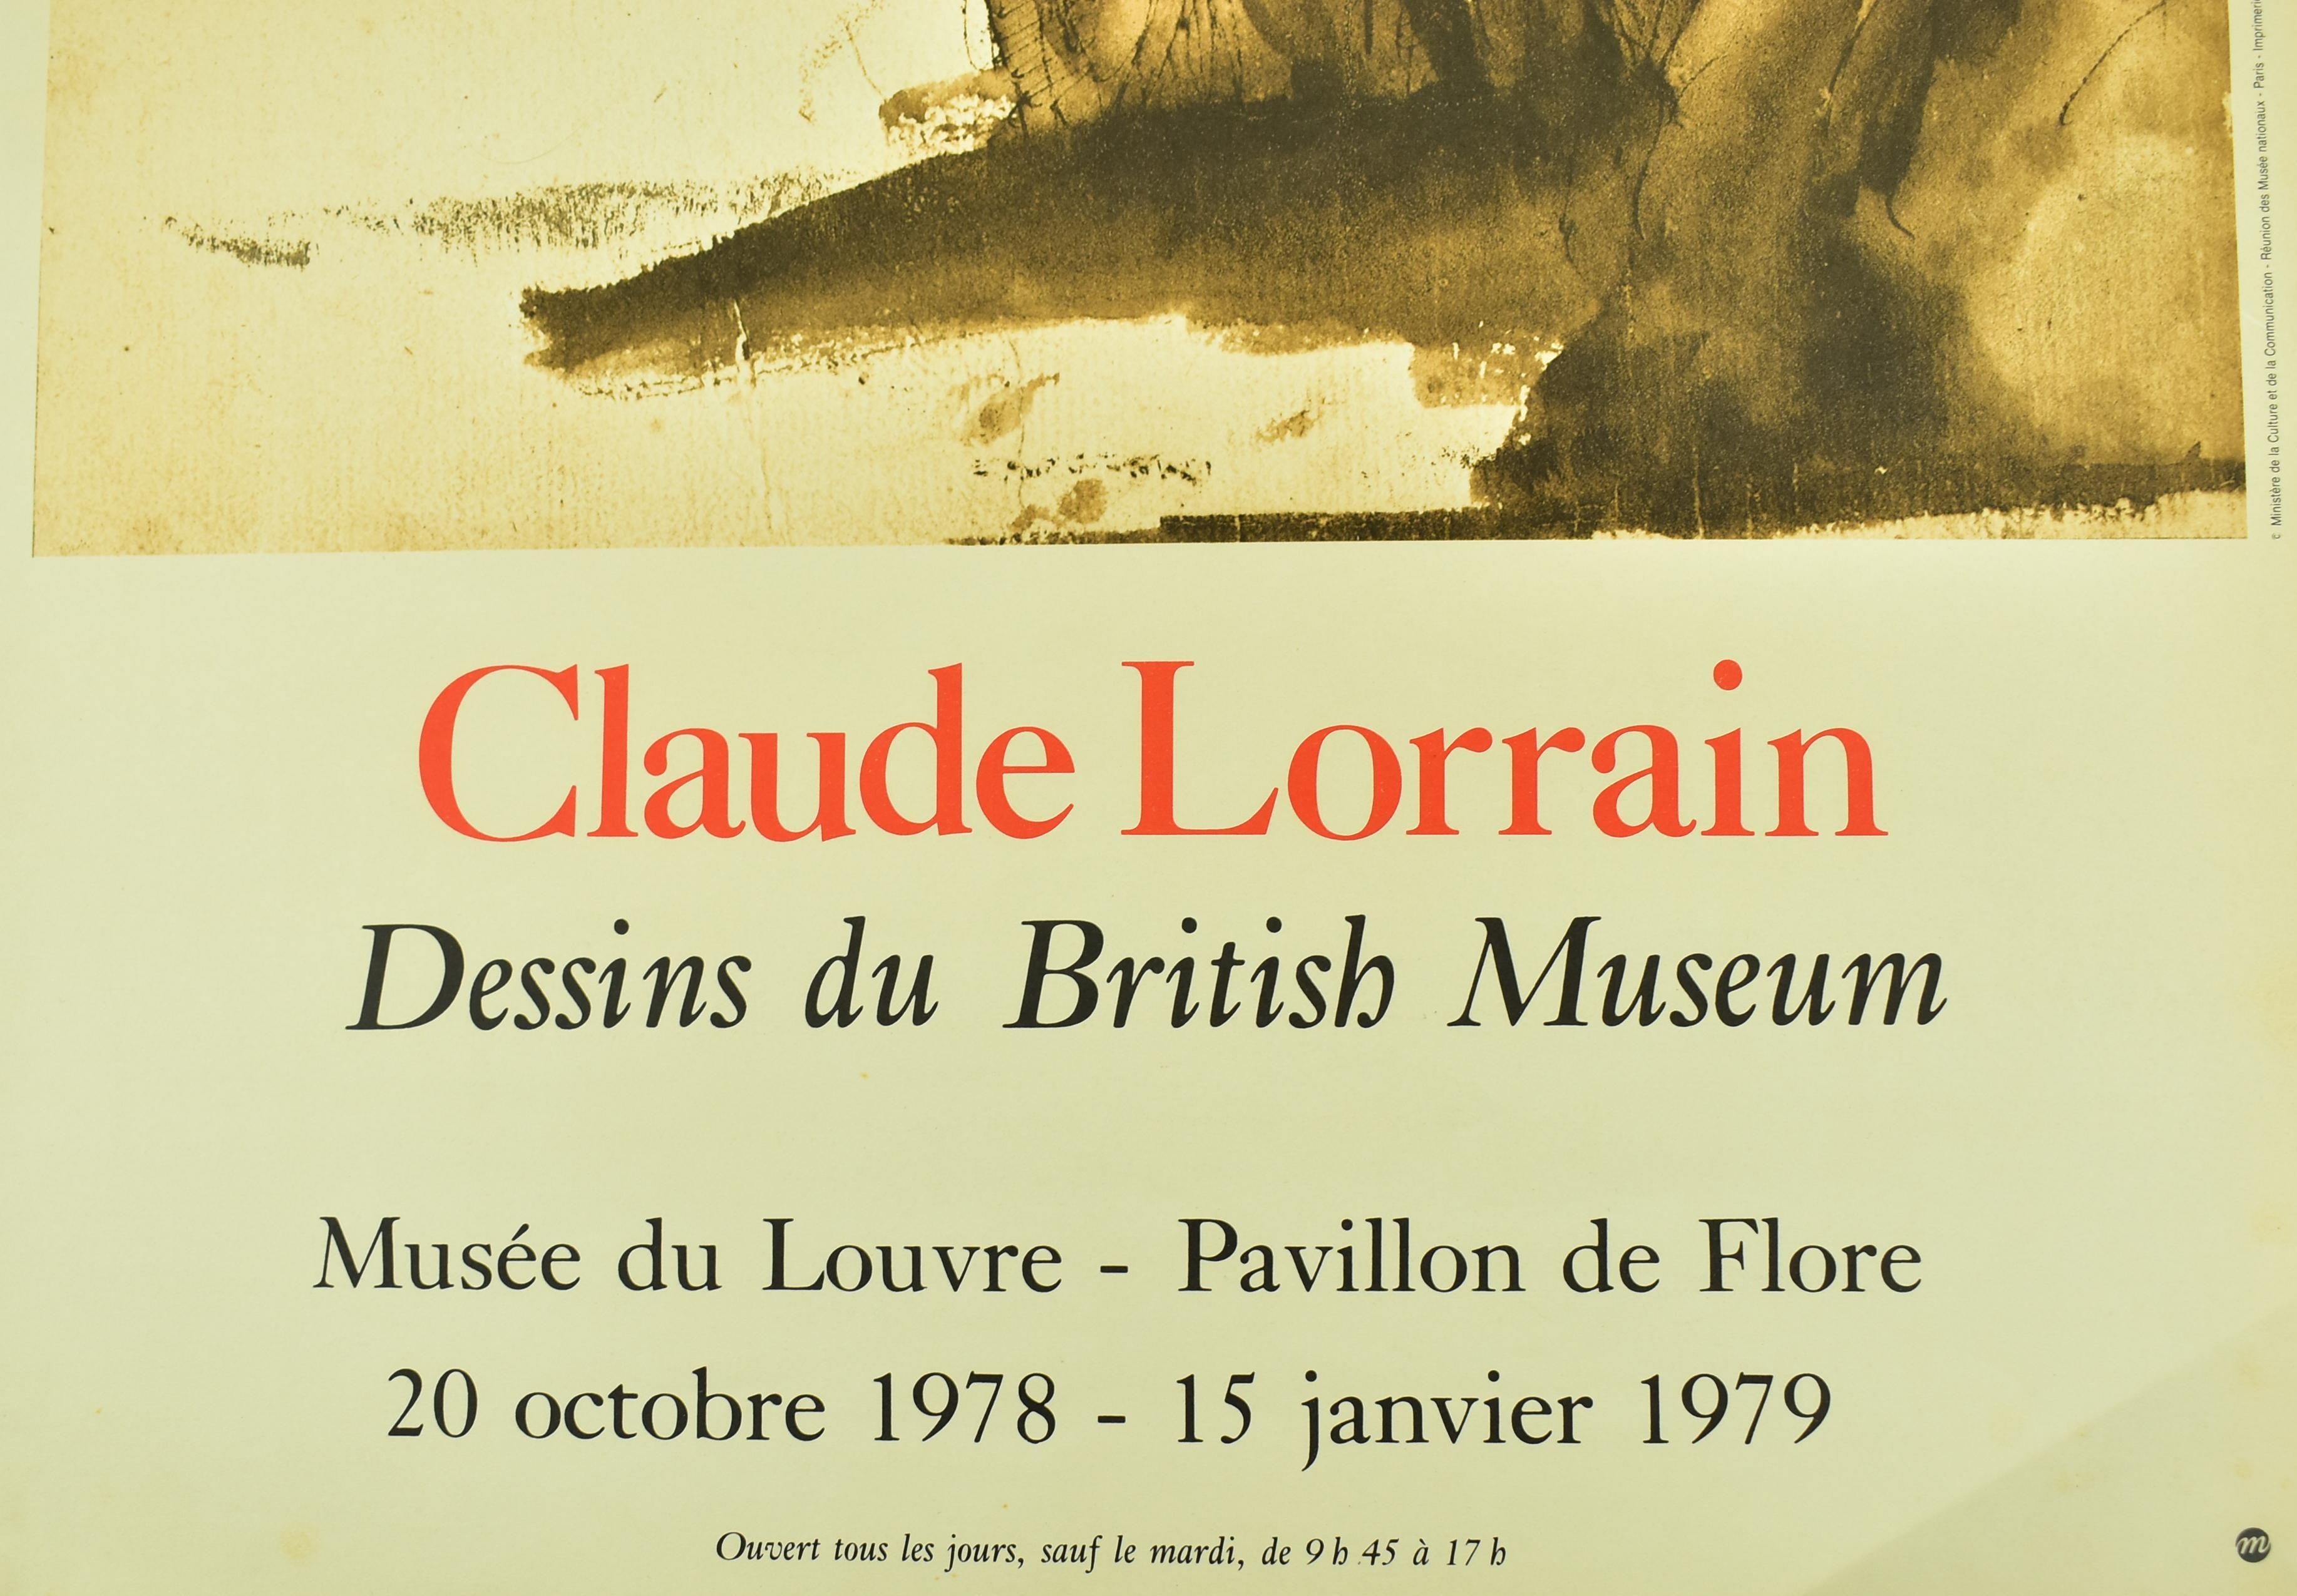 CLAUDE LORRAIN - MUSEE DU LOUVRE EXHIBITION POSTER 1978 - Image 4 of 5